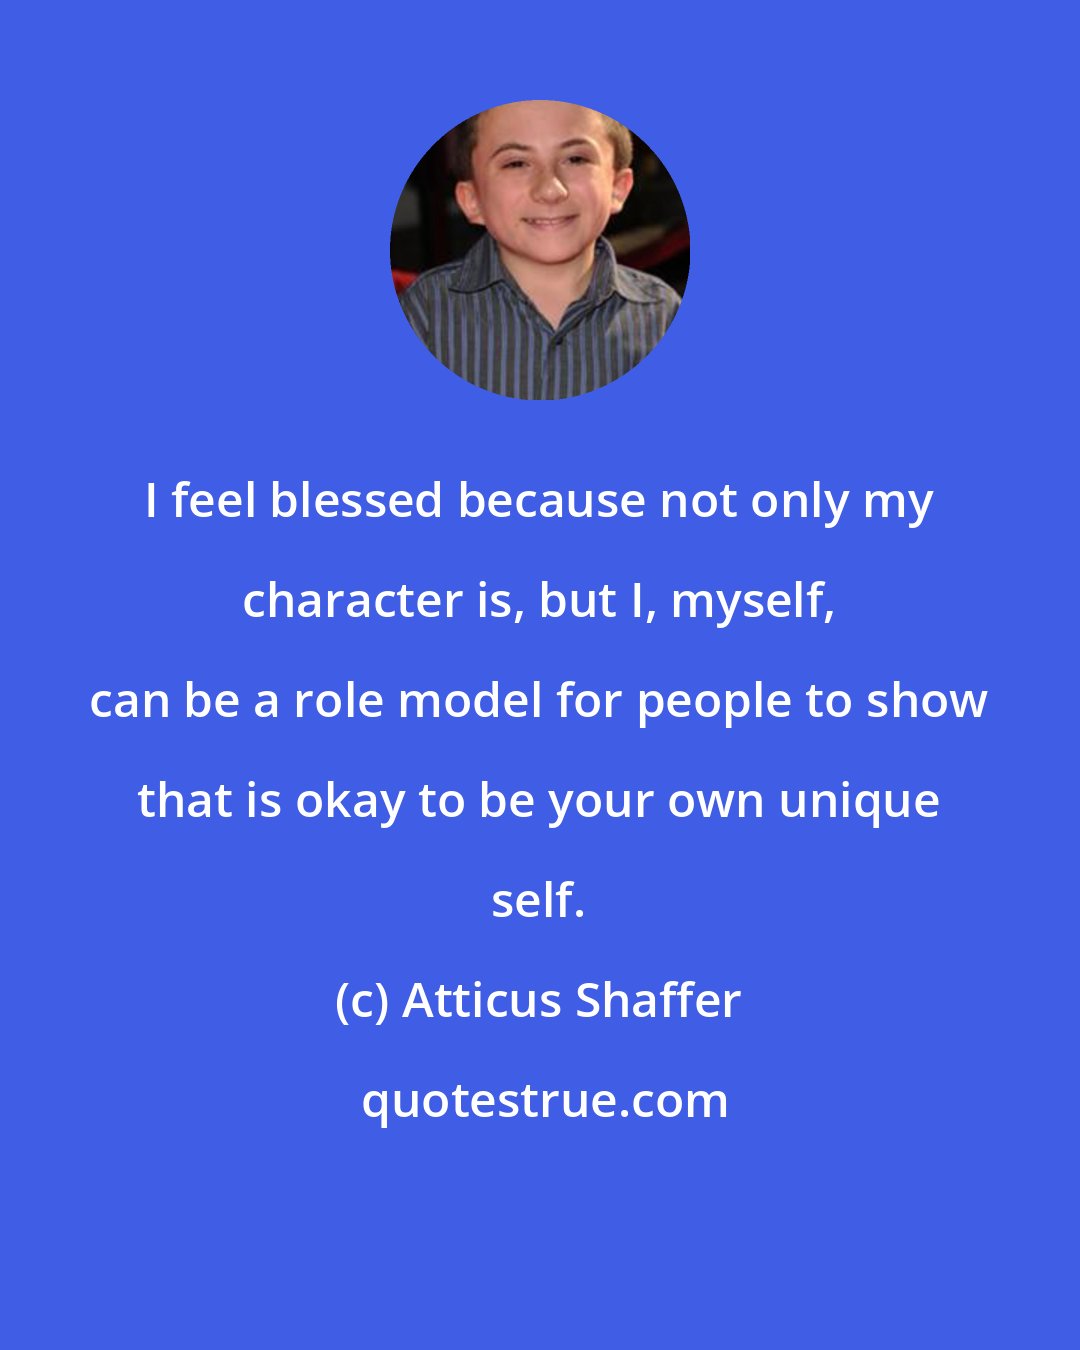 Atticus Shaffer: I feel blessed because not only my character is, but I, myself, can be a role model for people to show that is okay to be your own unique self.